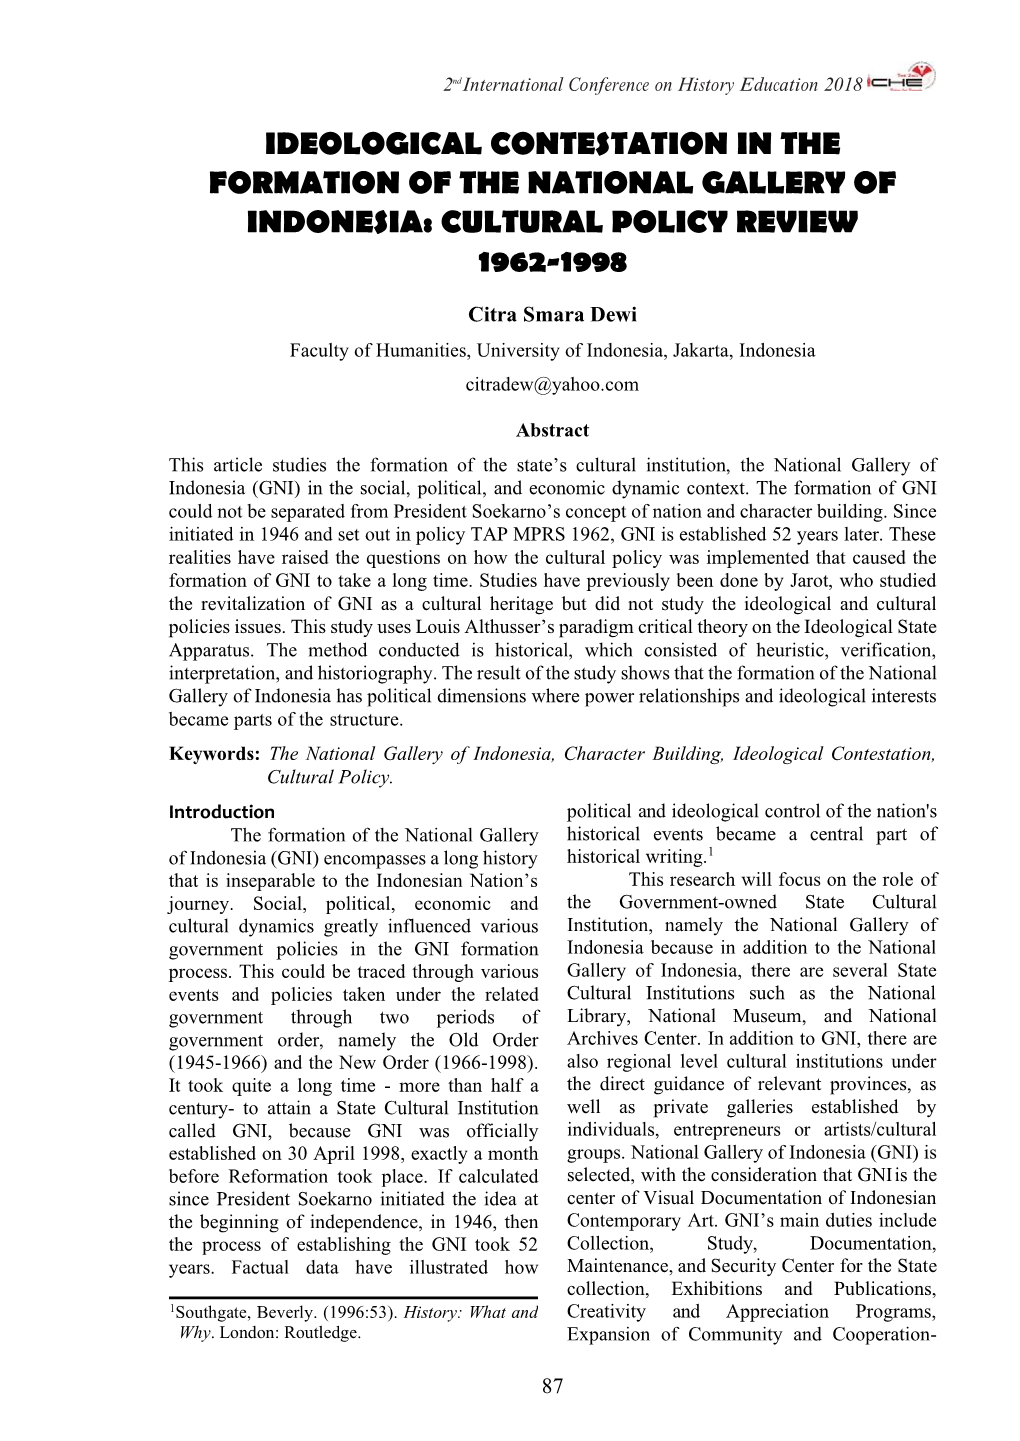 Ideological Contestation in the Formation of the National Gallery of Indonesia: Cultural Policy Review 1962-1998